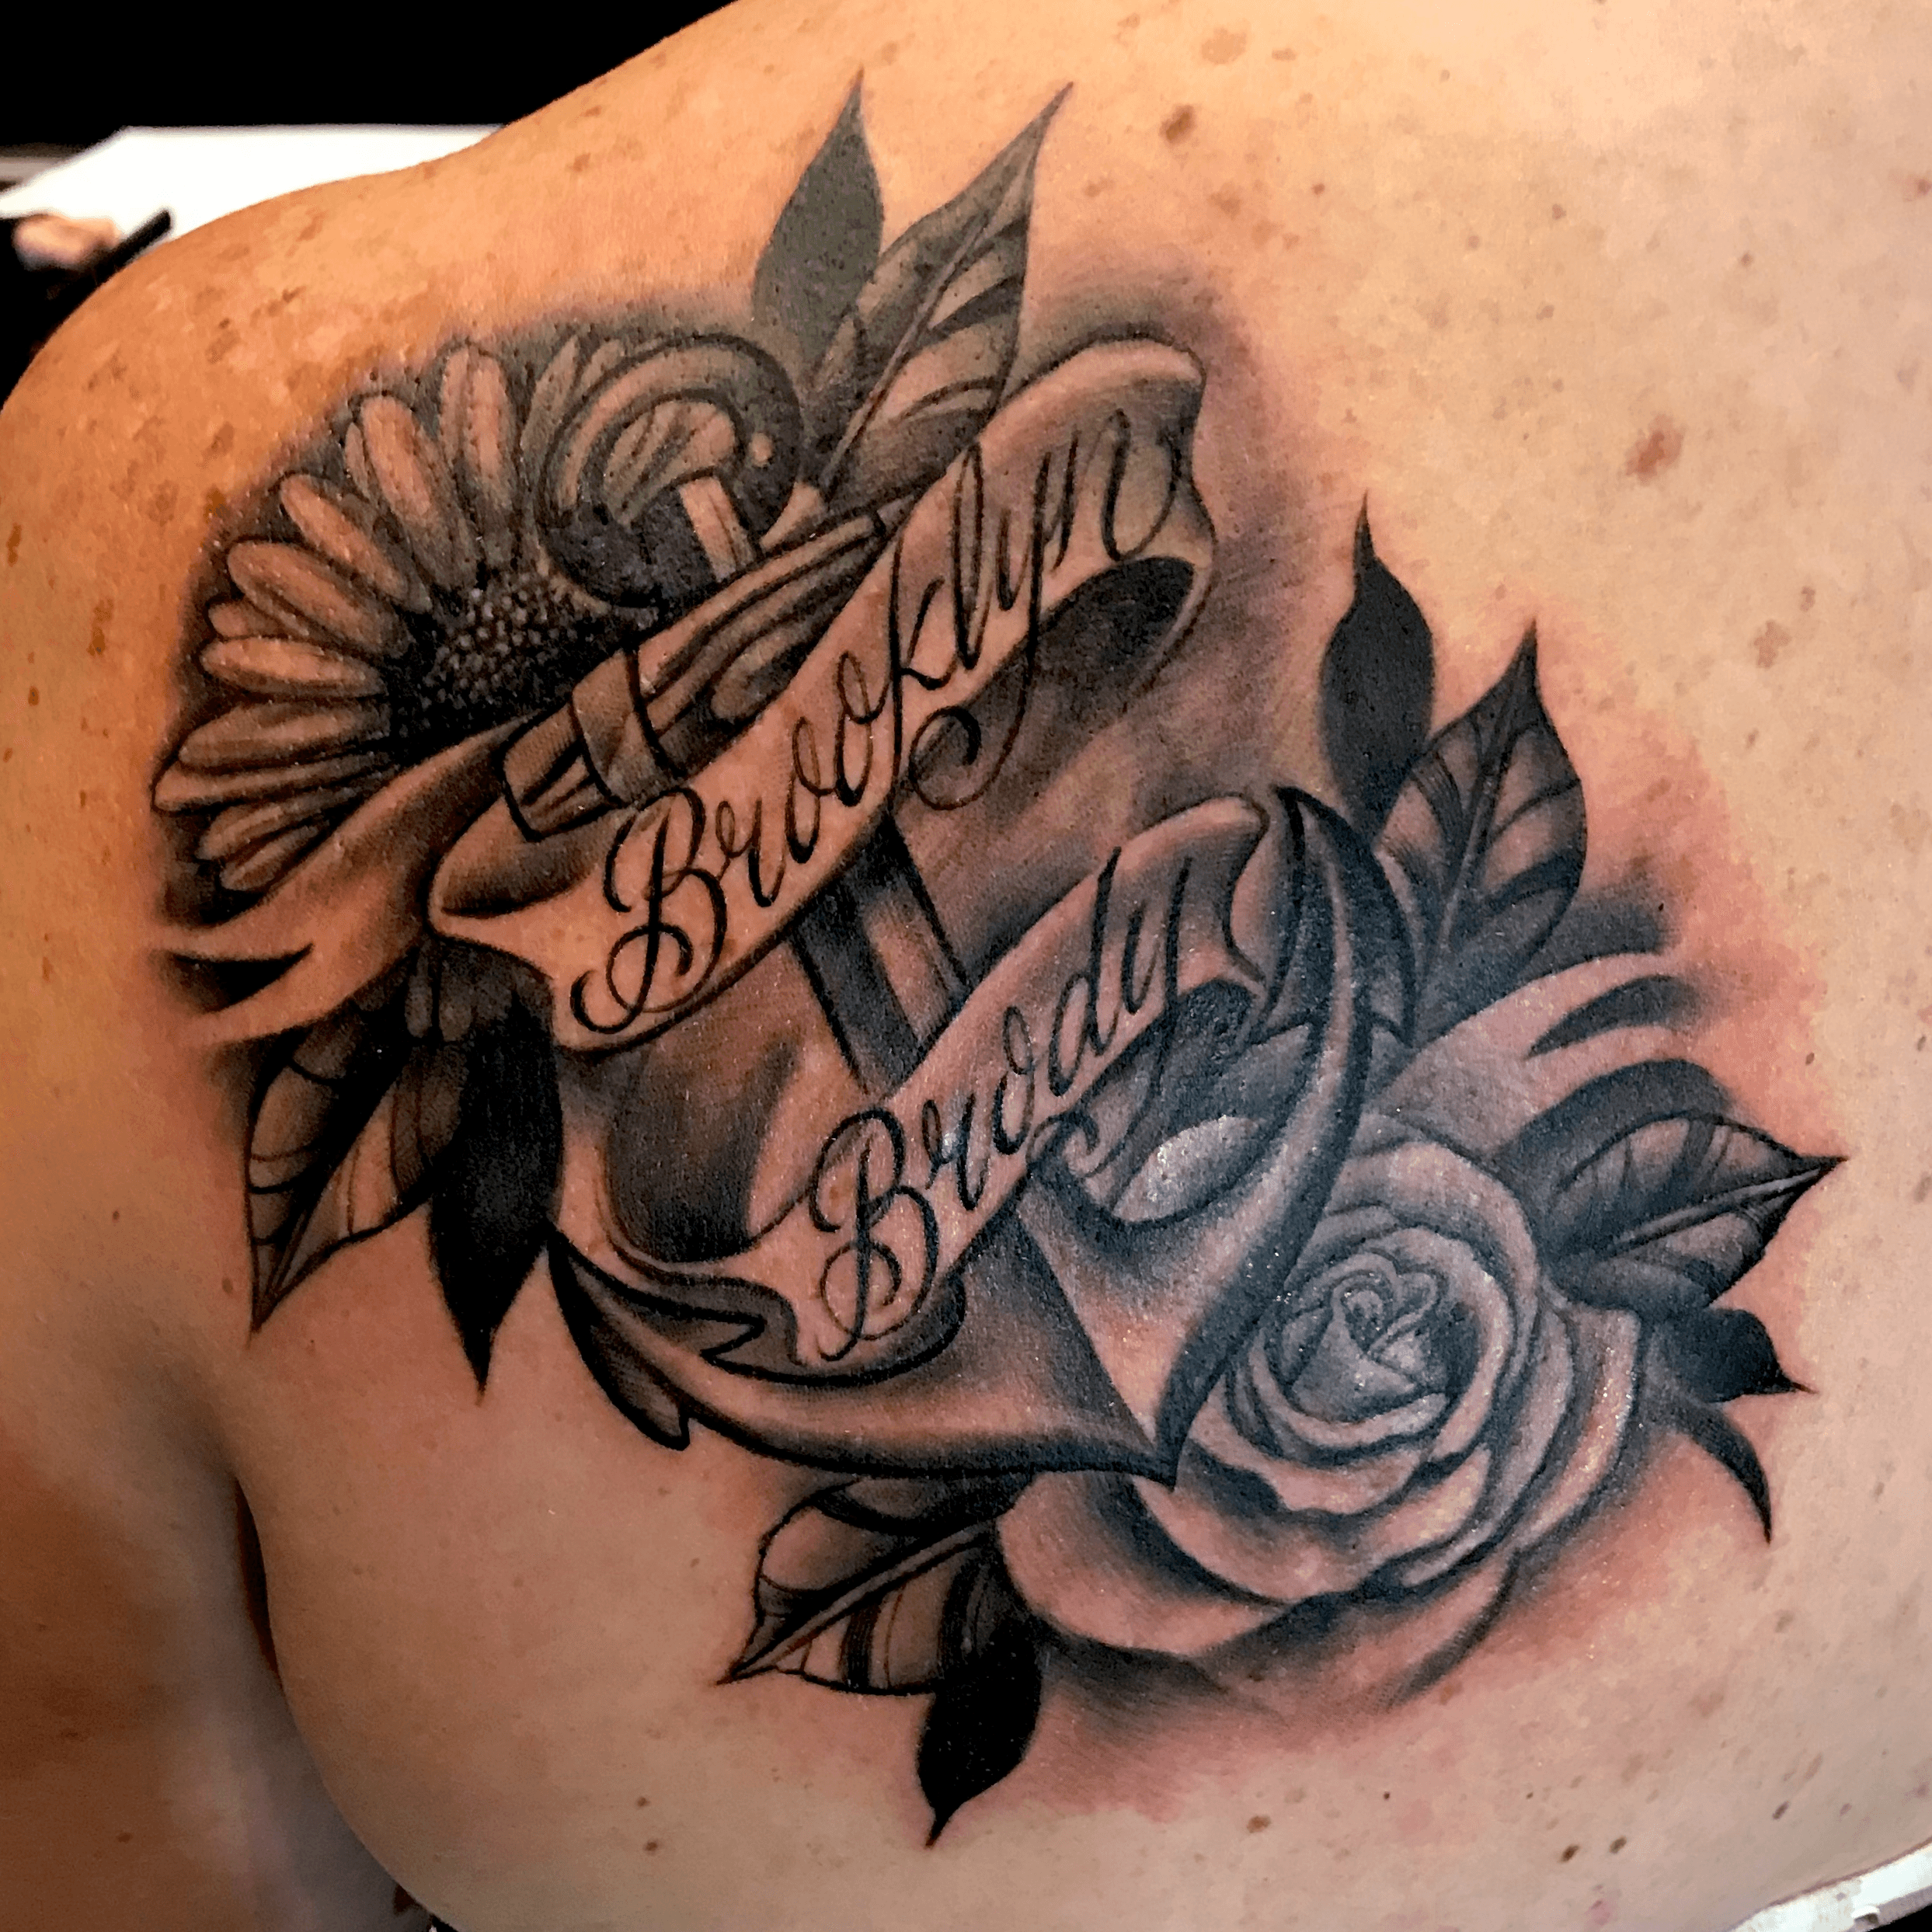 rose tattoos on chest with names